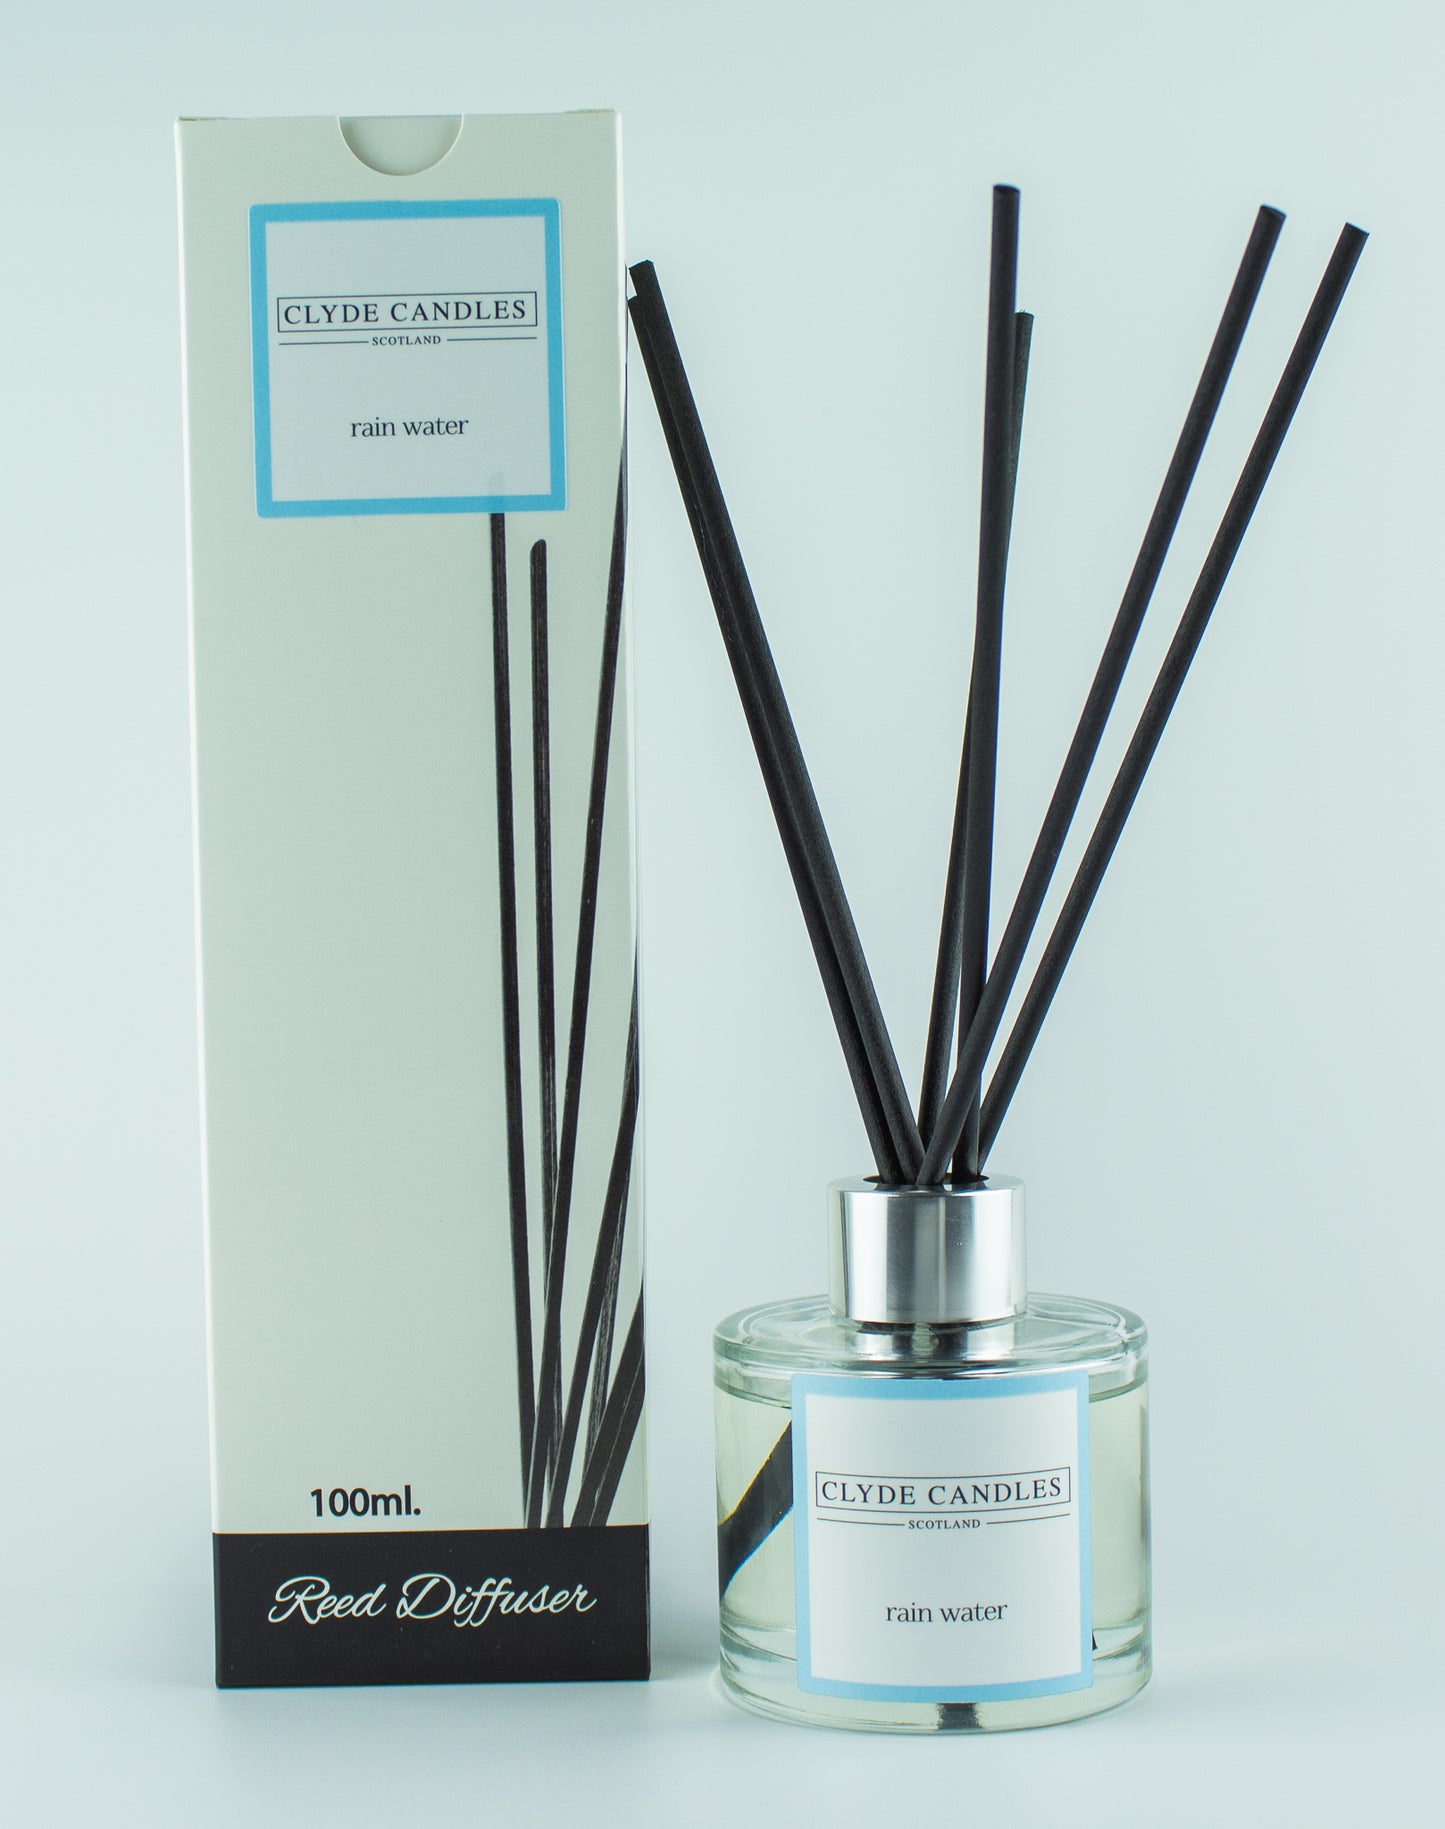 Rain Water Reed Diffuser - Clyde Candles, Luxury Diffuser Oil with a Set of 7 Fibre Sticks, 100ml, Best Aroma Scent for Home, Kitchen, Living Room, Bathroom. Fragrance Diffusers set with sticks